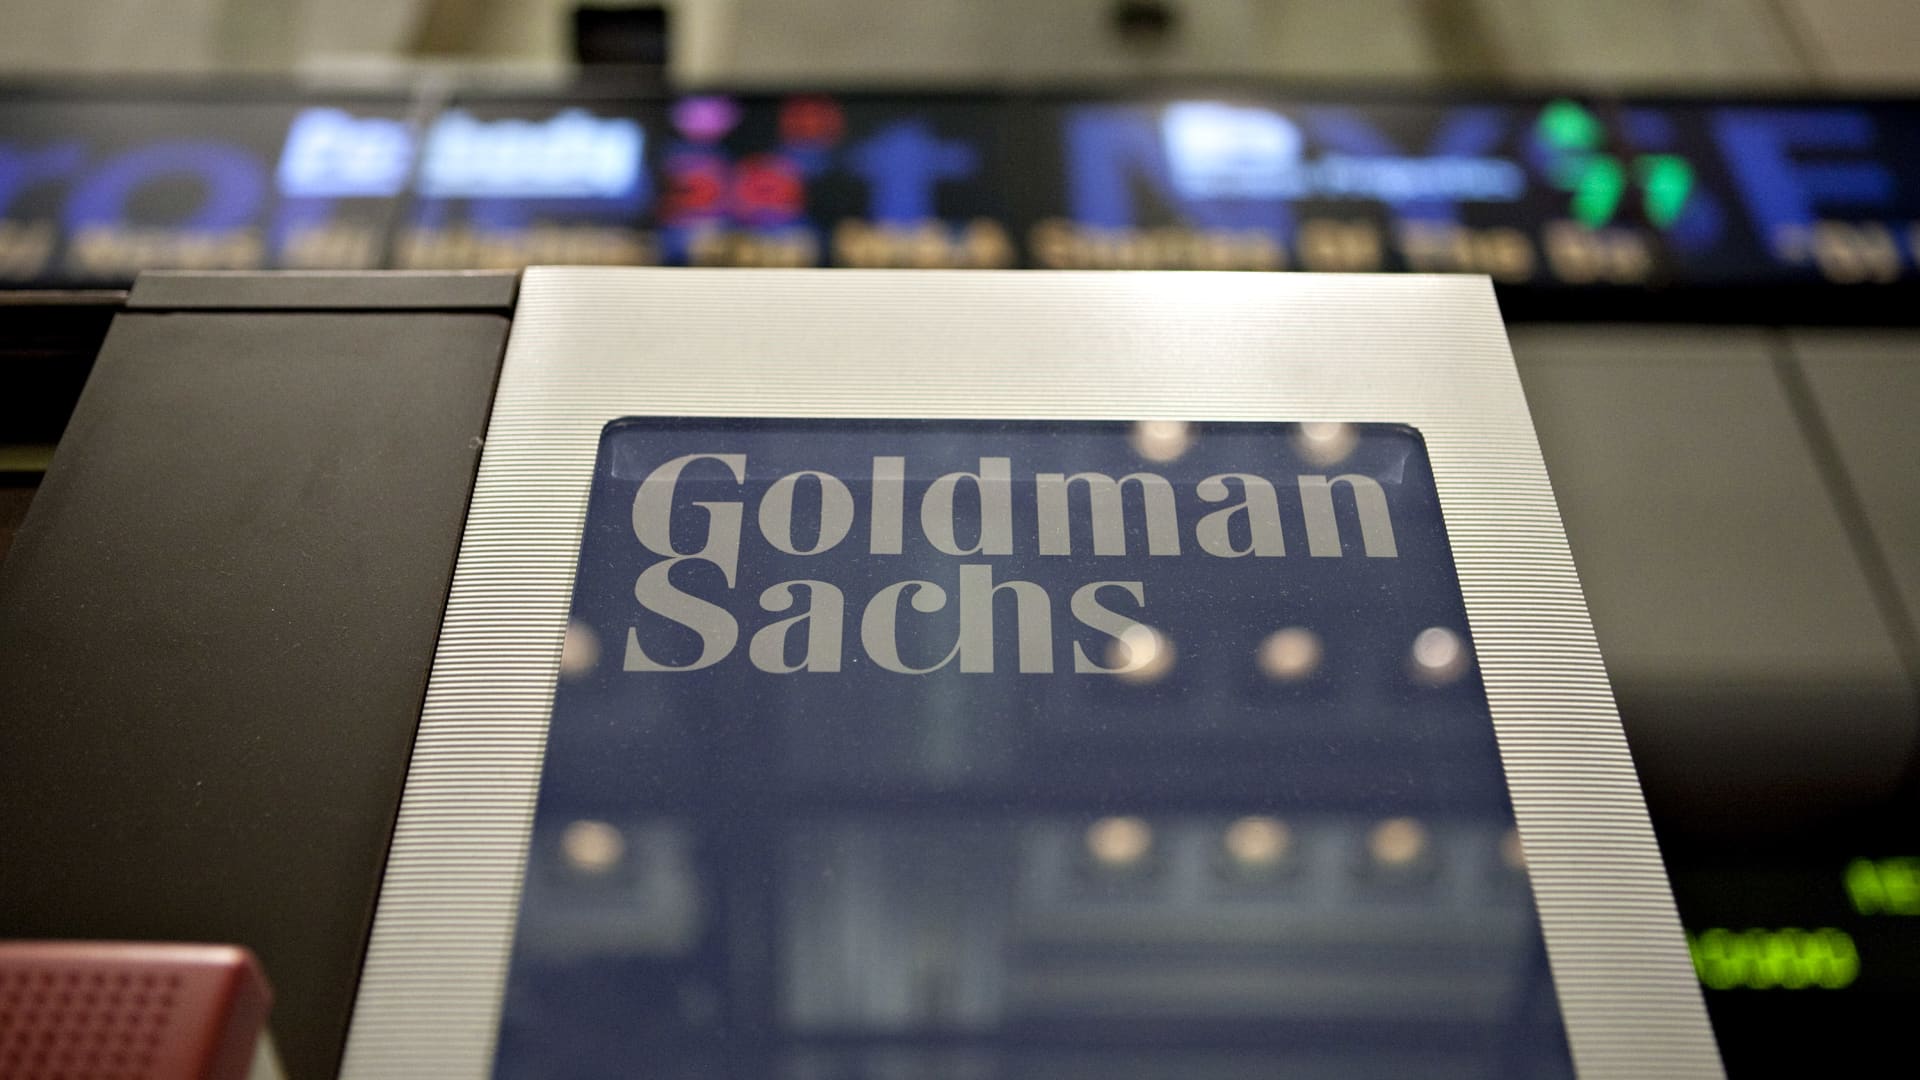 goldman-sachs-seeks-to-impose-order-on-expanding-crypto-universe-with-classification-system